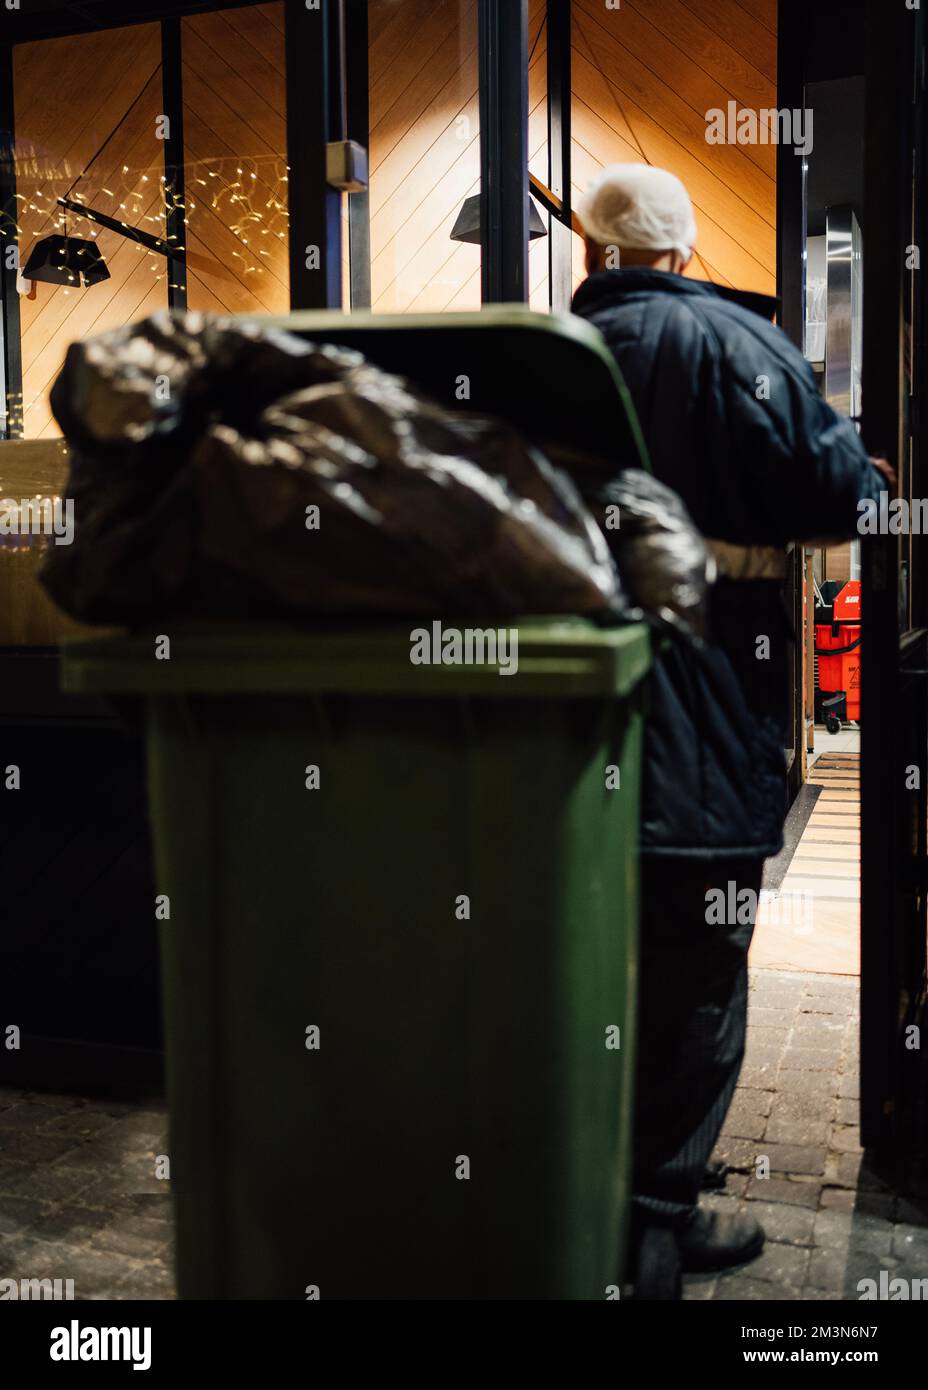 Man worker taking out a loaded green garbage bin waste trash and recycling from bar at christmas.  Stock Photo